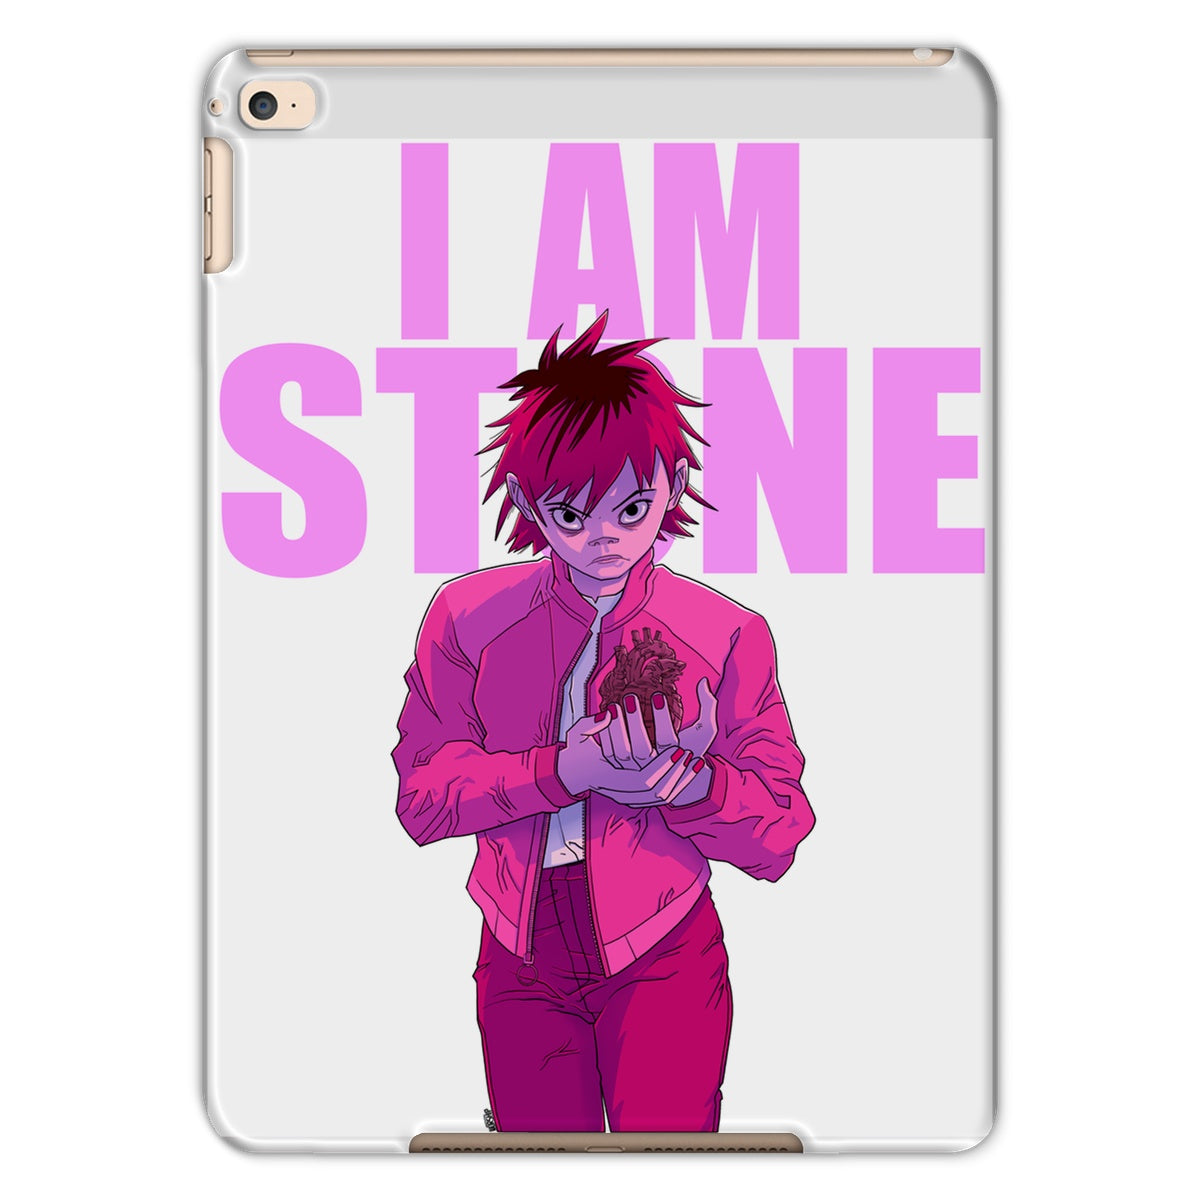 Unique and cool heart of stone Tablet Case illustration